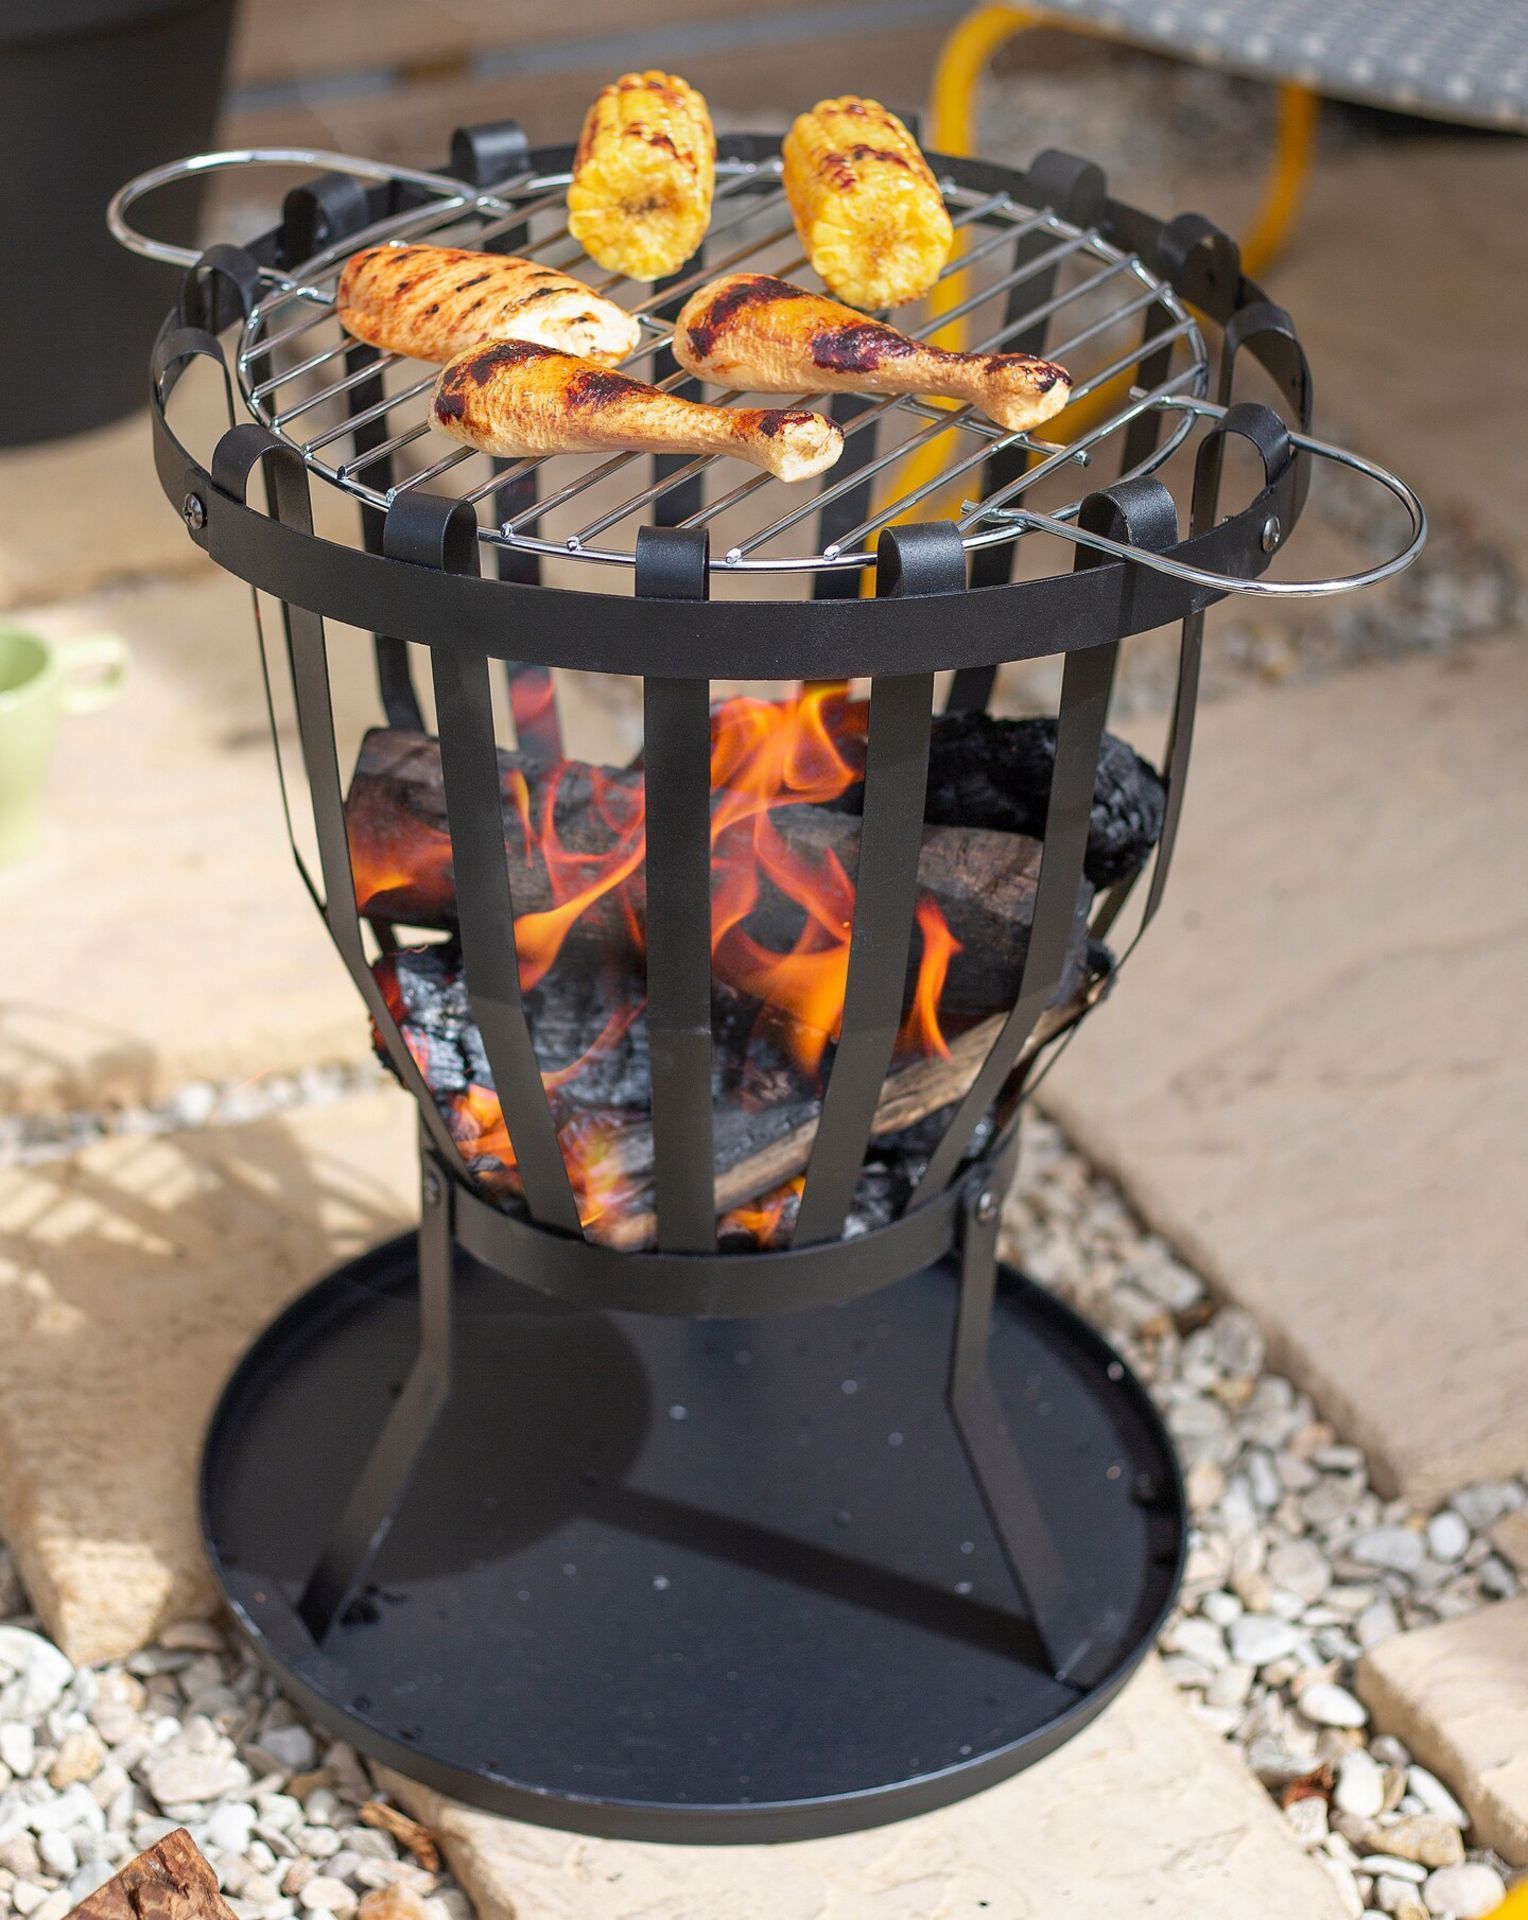 2 X NEW & BOXED LA HACIENDA Curitiba Fire Basket with Cooking Grill. RRP £55 EACH. The simple